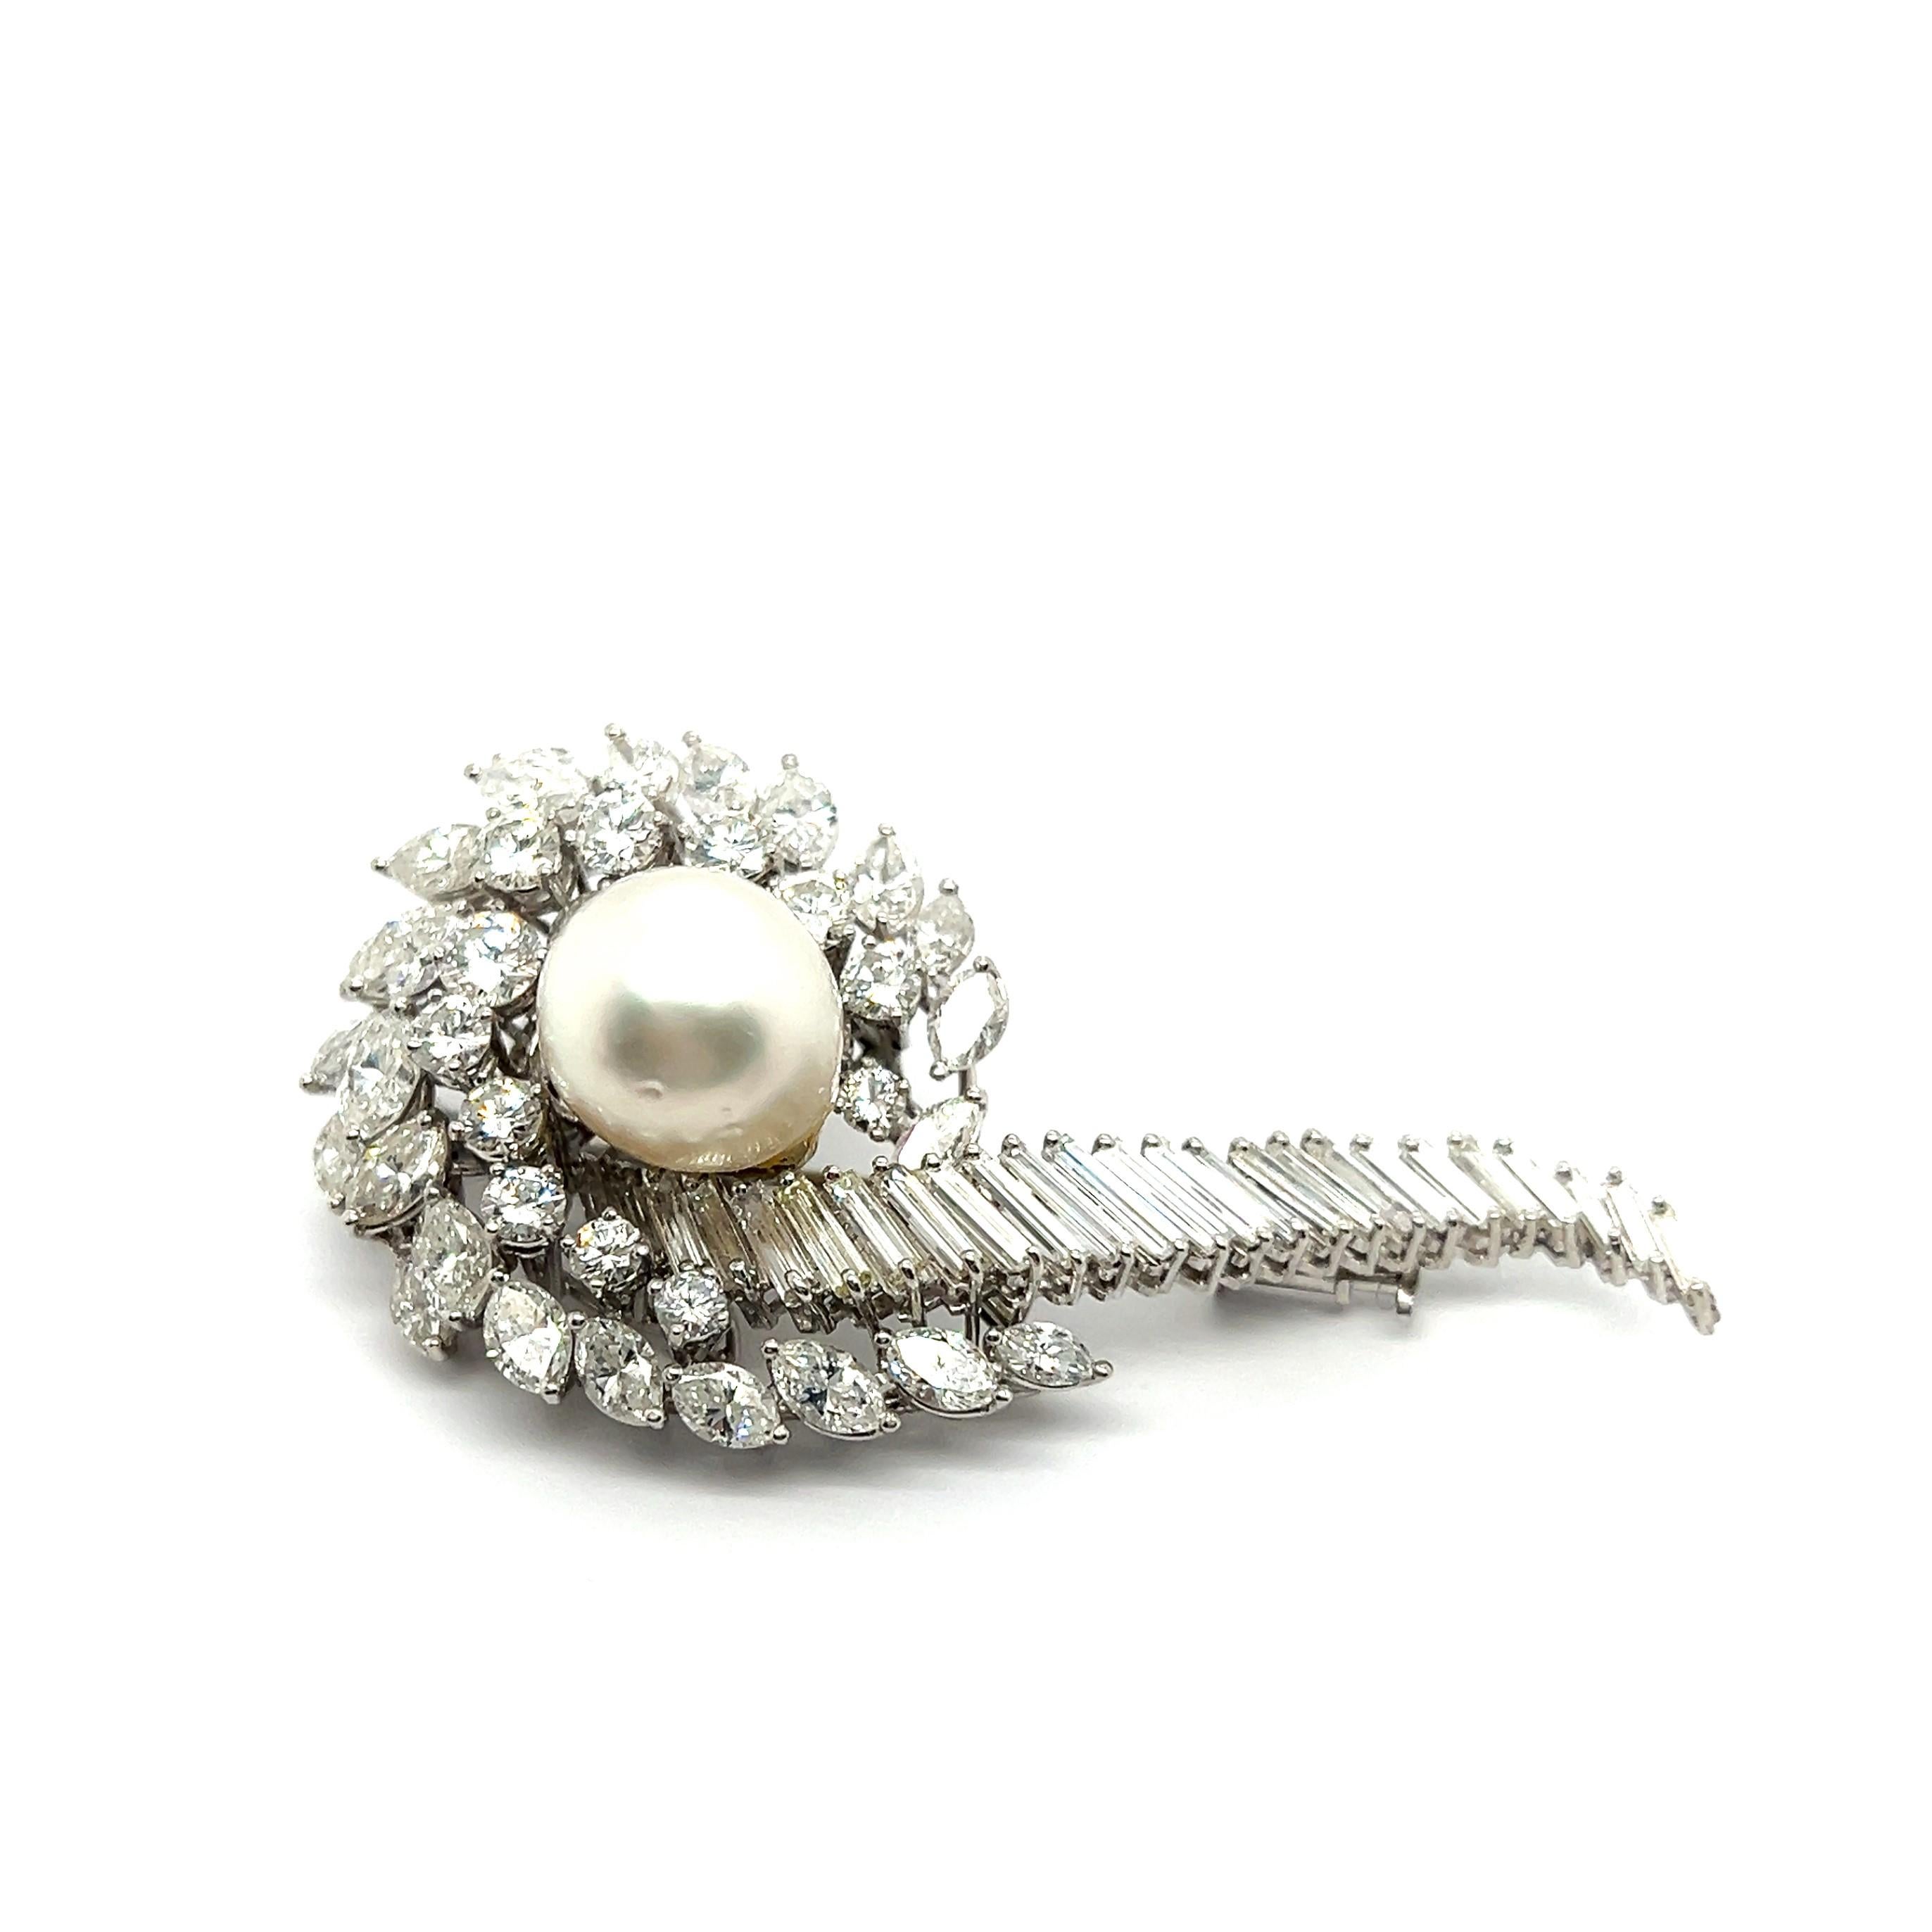 Radiating ethereal allure, this platinum brooch combines the natural beauty of pearls and enchanting sparkle of diamonds, creating a captivating tale of timeless elegance.

At the heart of this piece, a luminescent South Sea Cultural Pearl reigns,